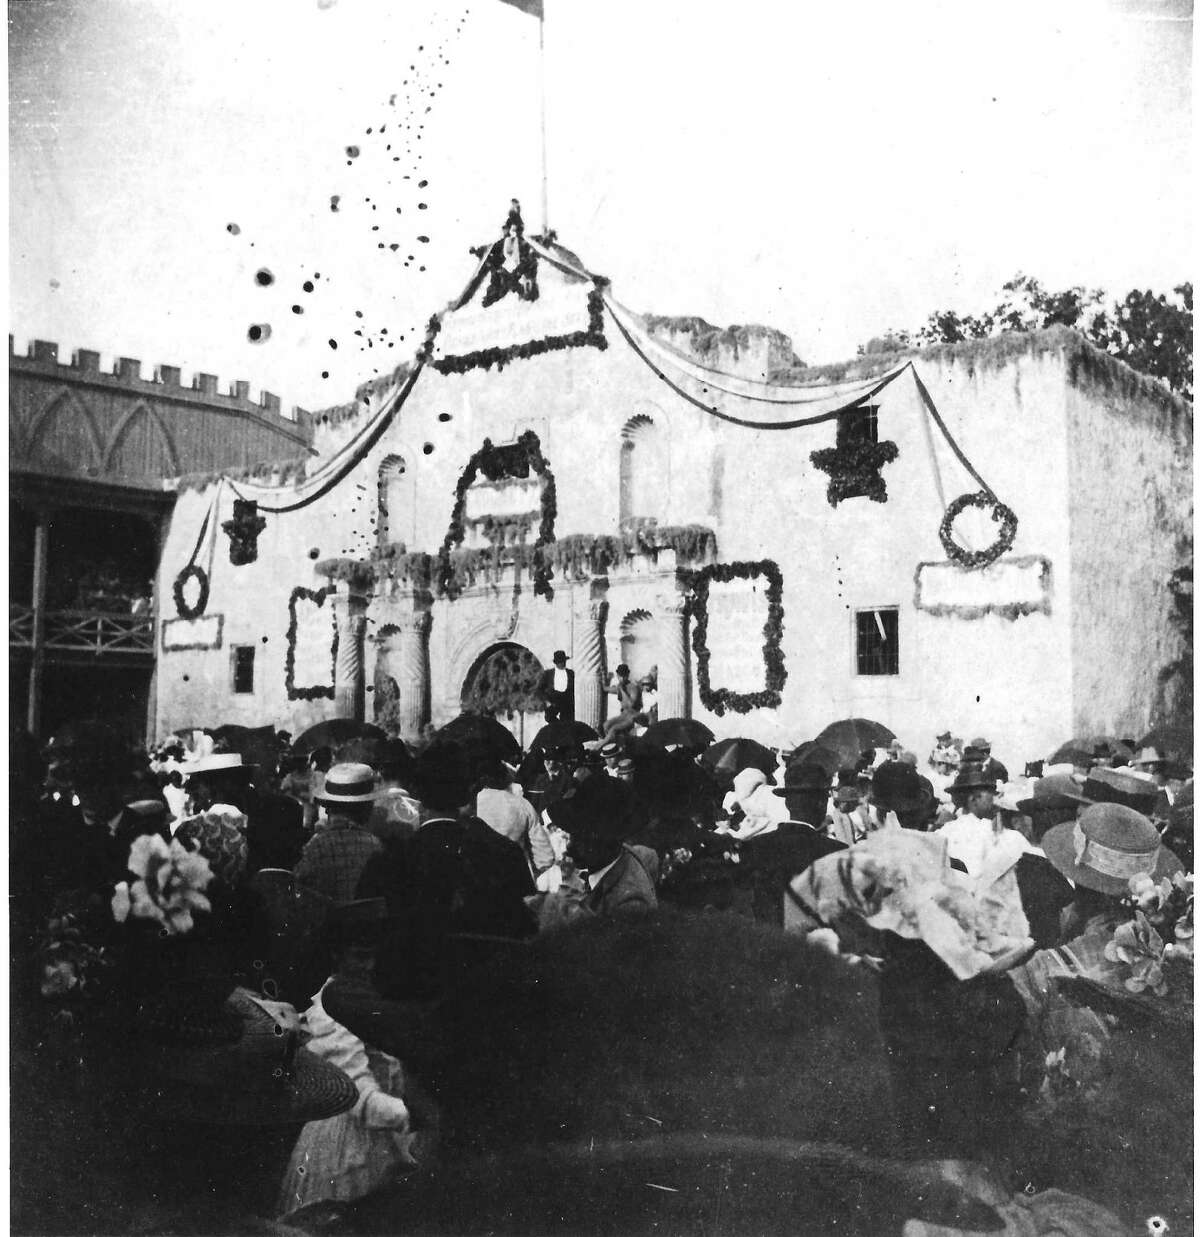 Celebration in front of a decorated Alamo in the 1890s.